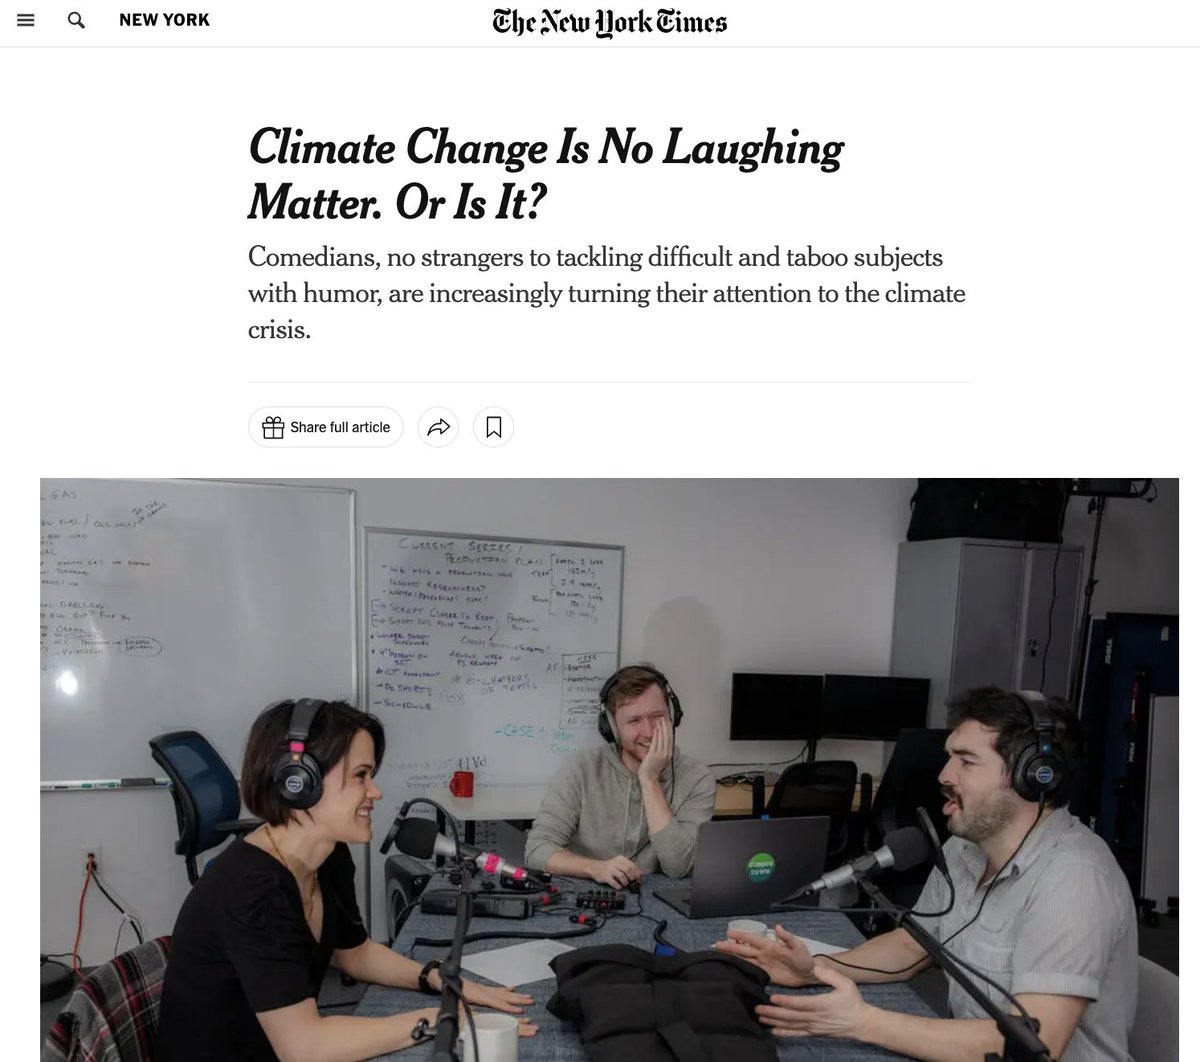 We're very proud to be mentioned alongside so many amazing initiatives exploring comedy and climate change! @andrewboyd @nick_oldridge @ClimateSciBreak @nytimes @RollieWilliams @51_PercentProj @ClimateTown @weareyellowdot @theclimatevote